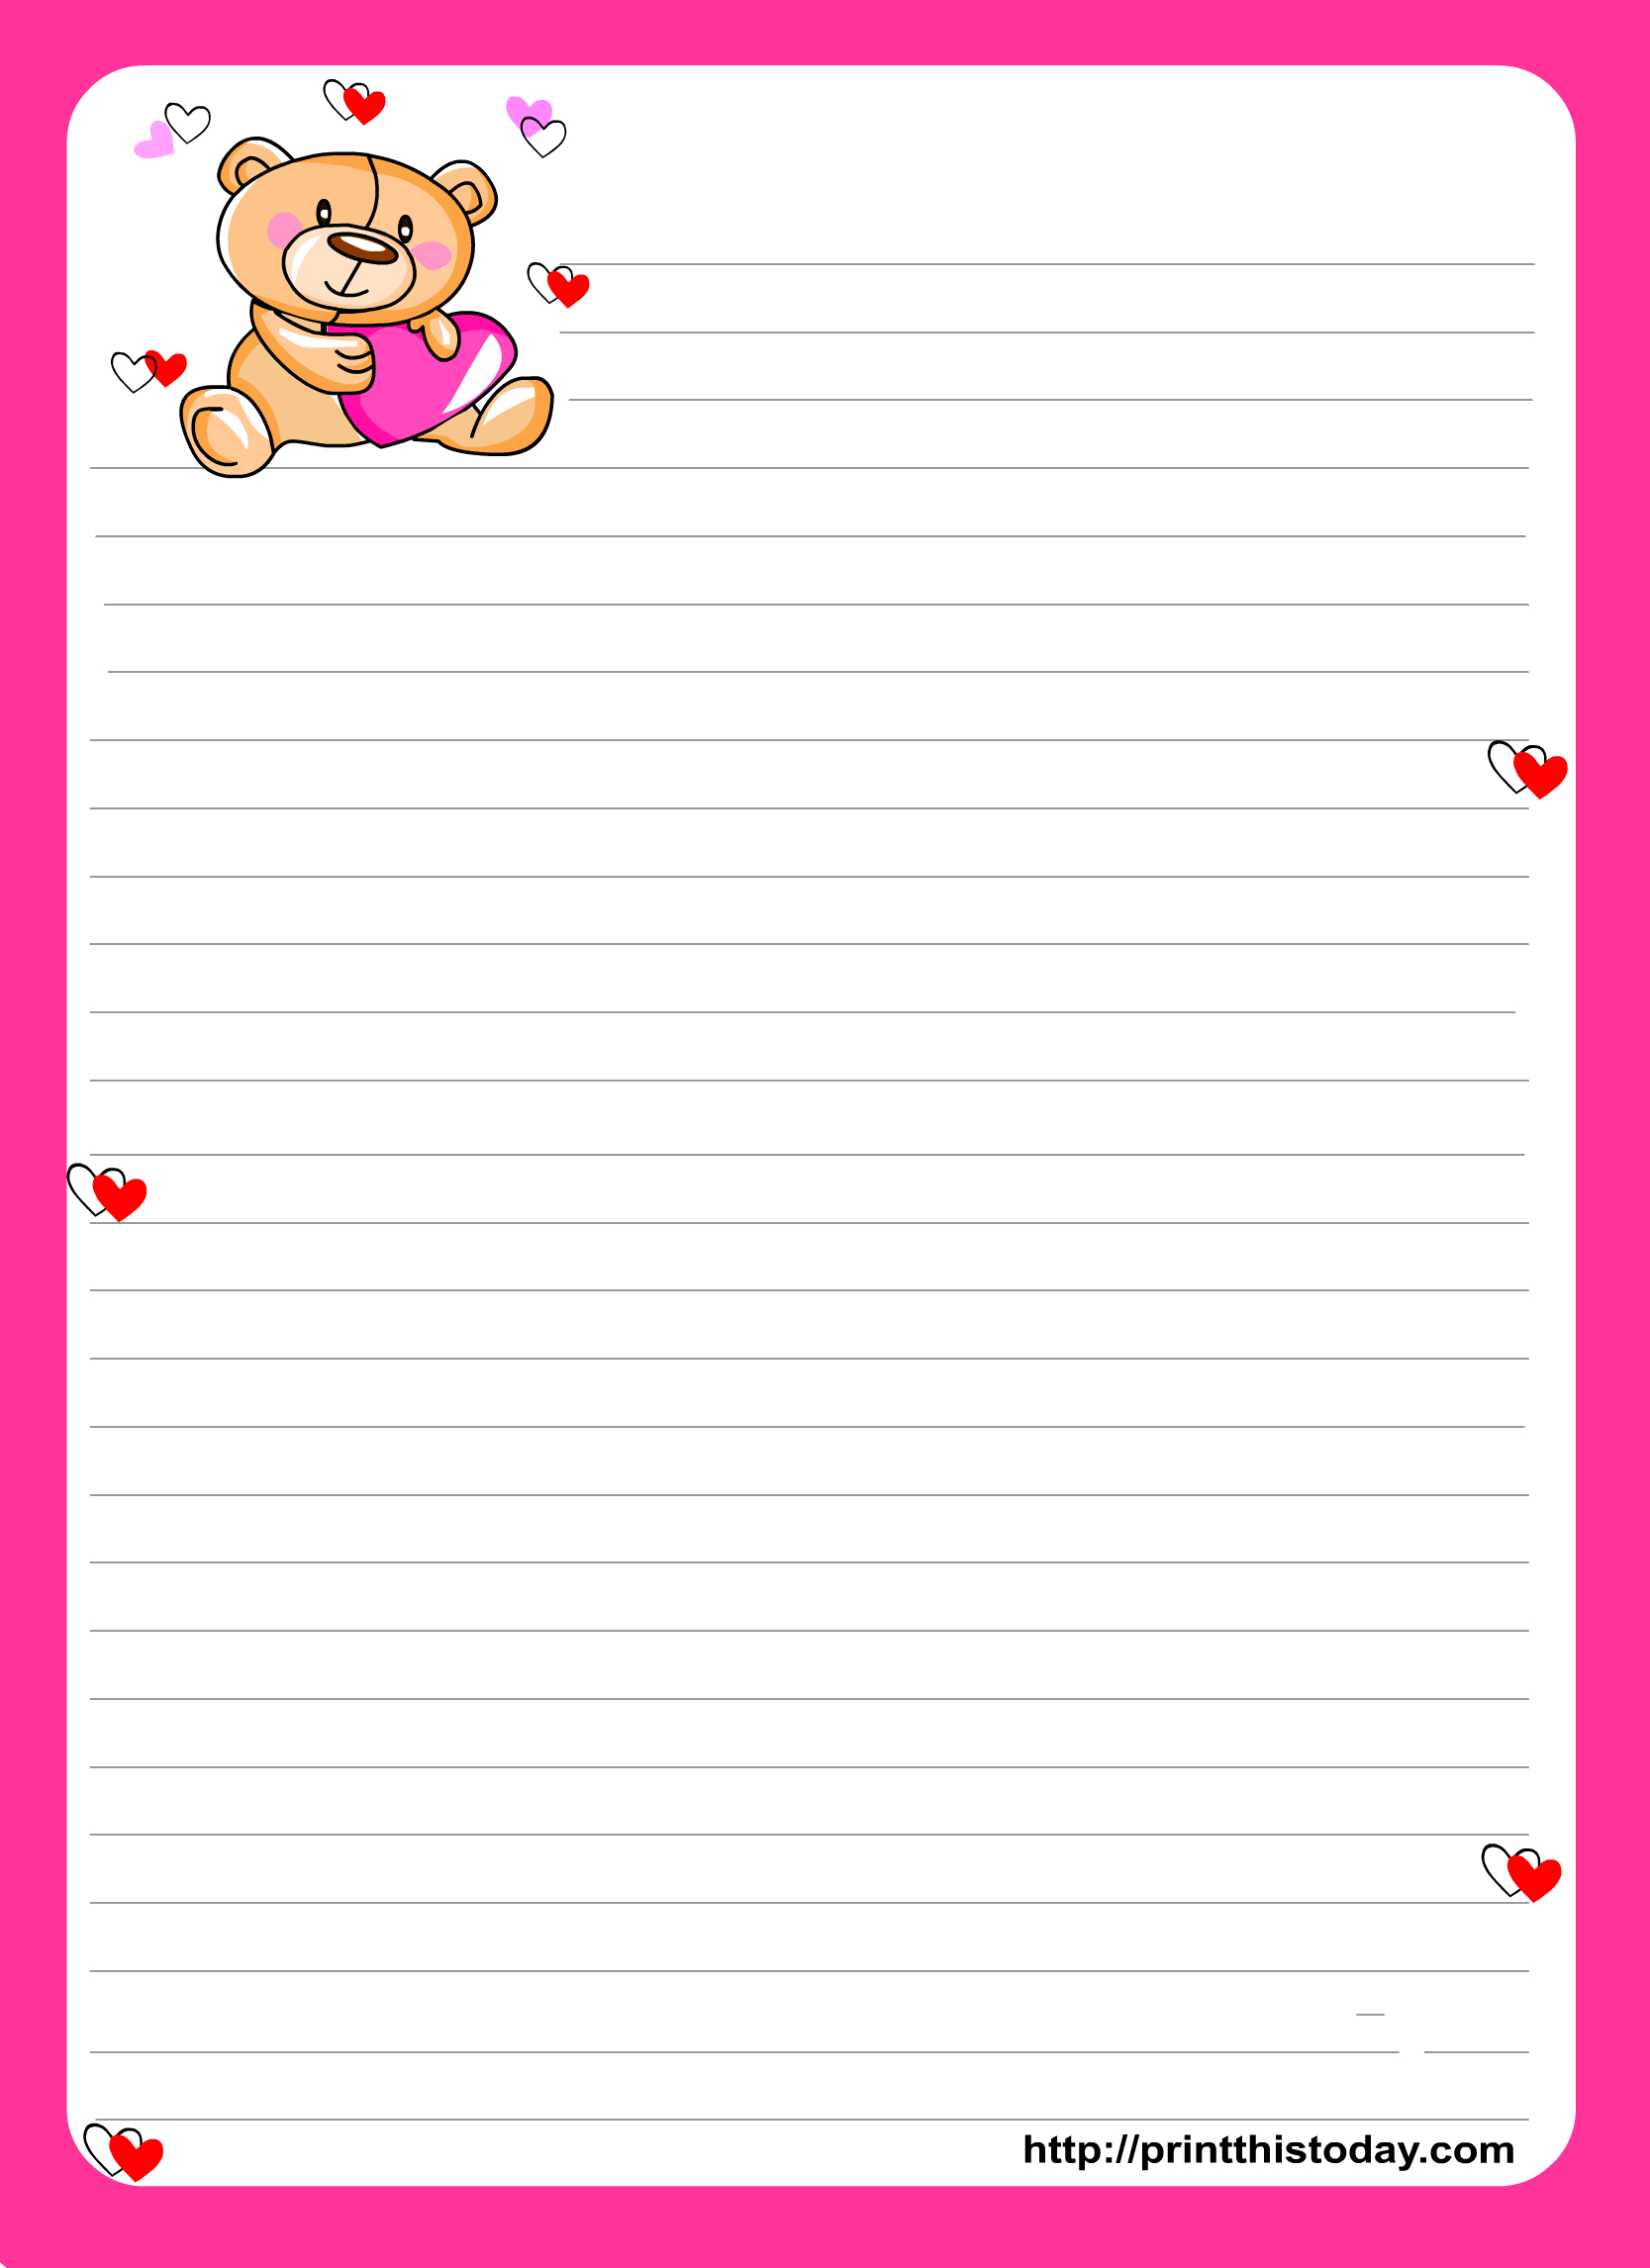 Printable Stationery Paper - Google Search | Stationery - Printables - Free Printable Stationery Writing Paper